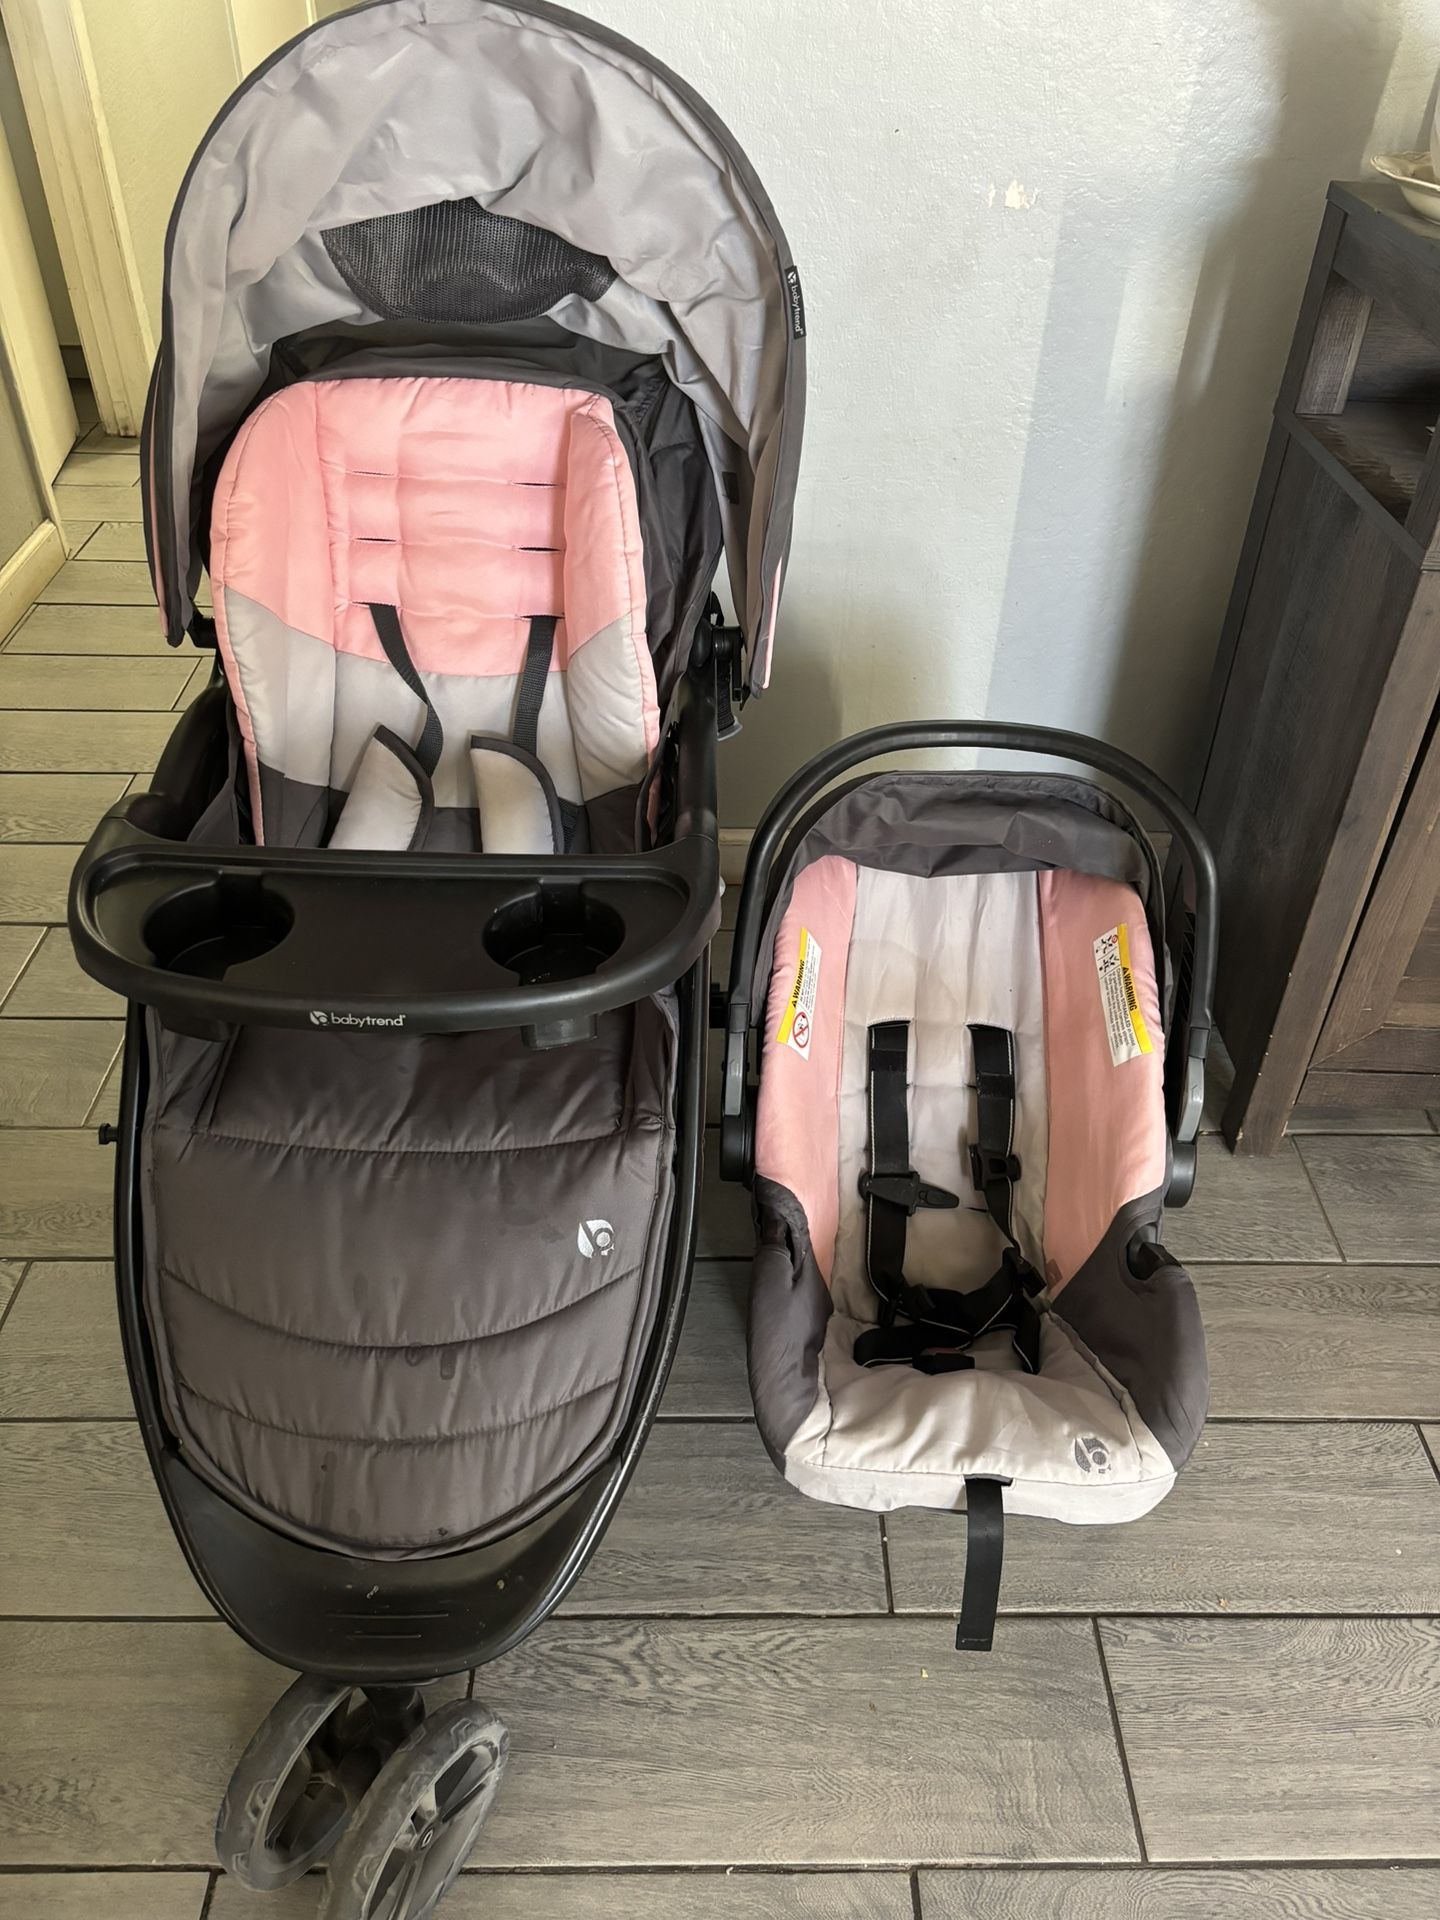 Stroller And Car seat With Base 